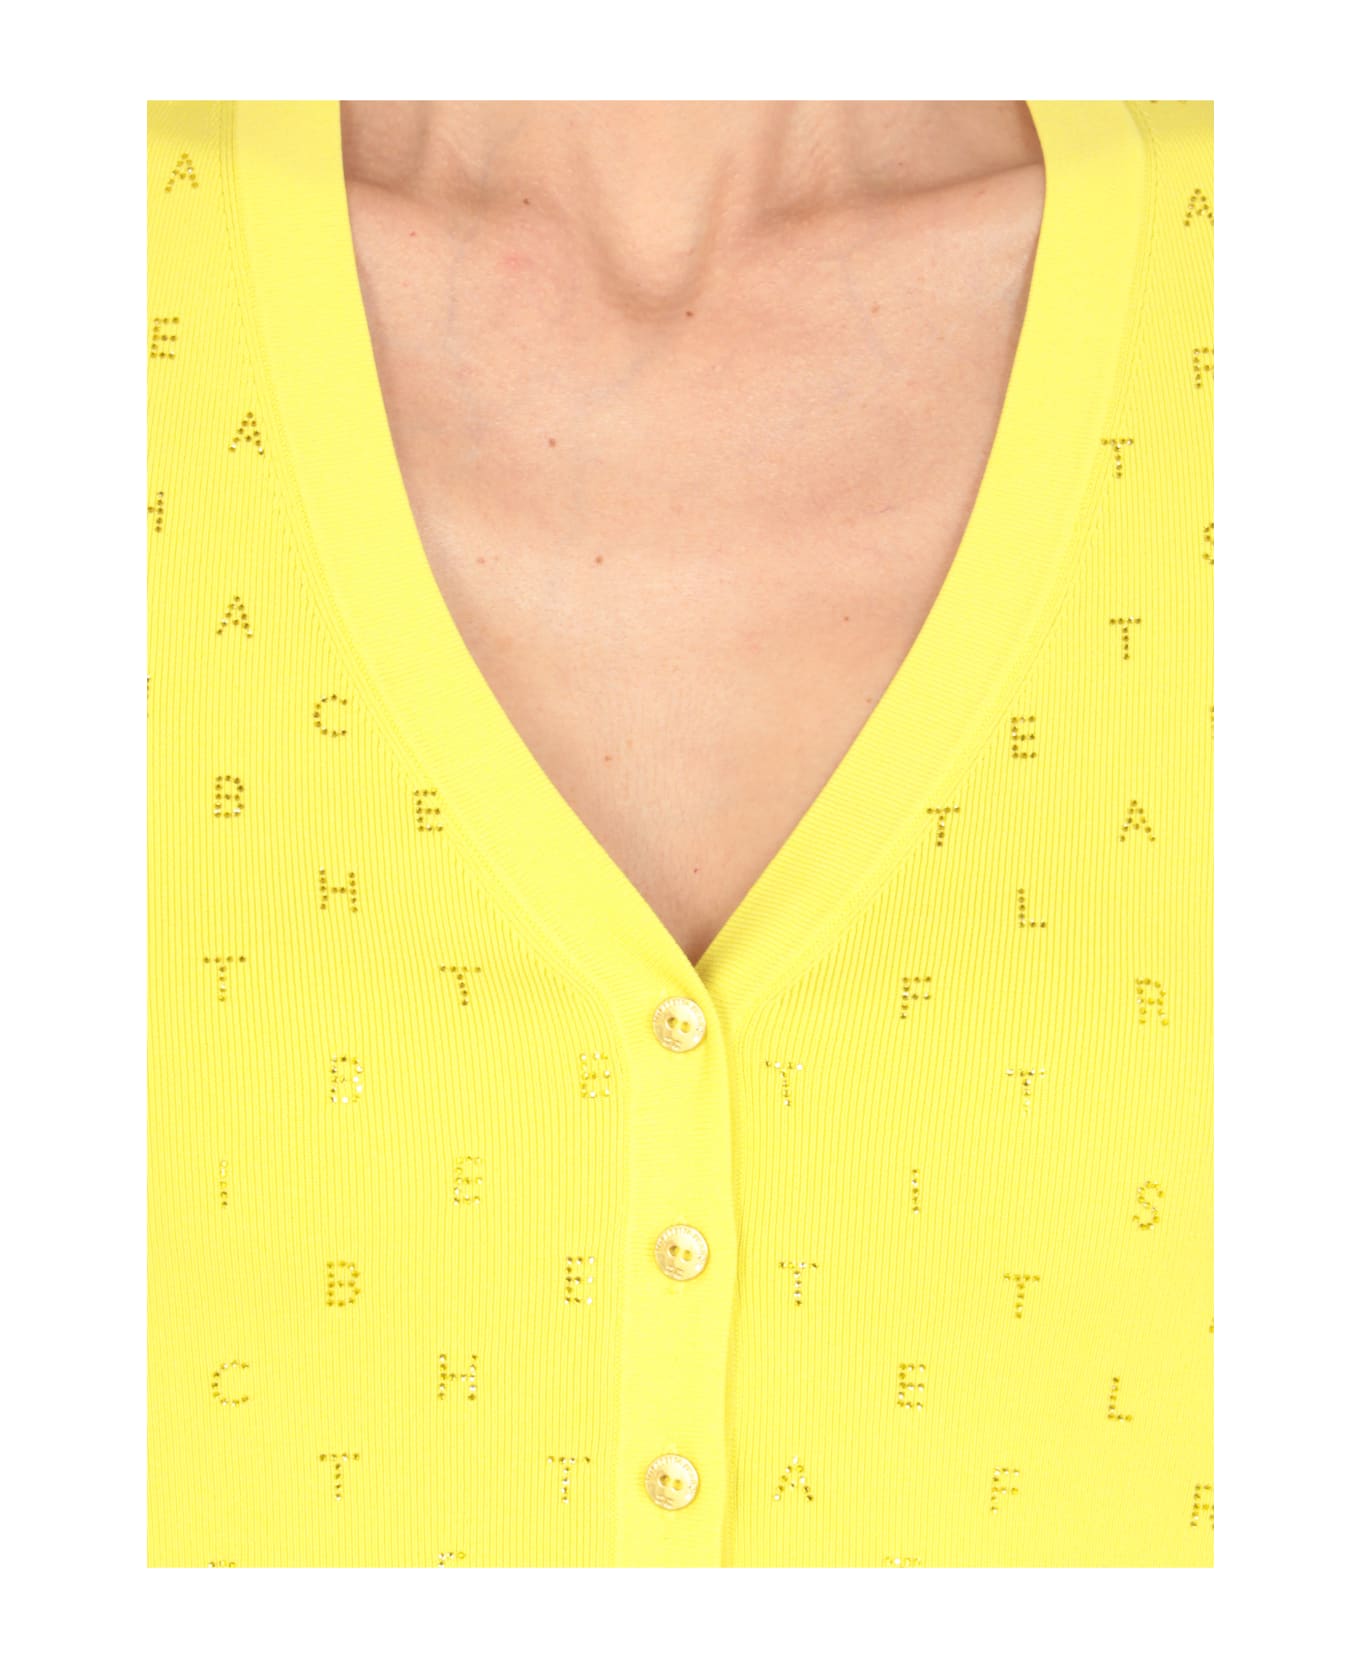 Elisabetta Franchi Cardigan With Strass Lettering - Yellow